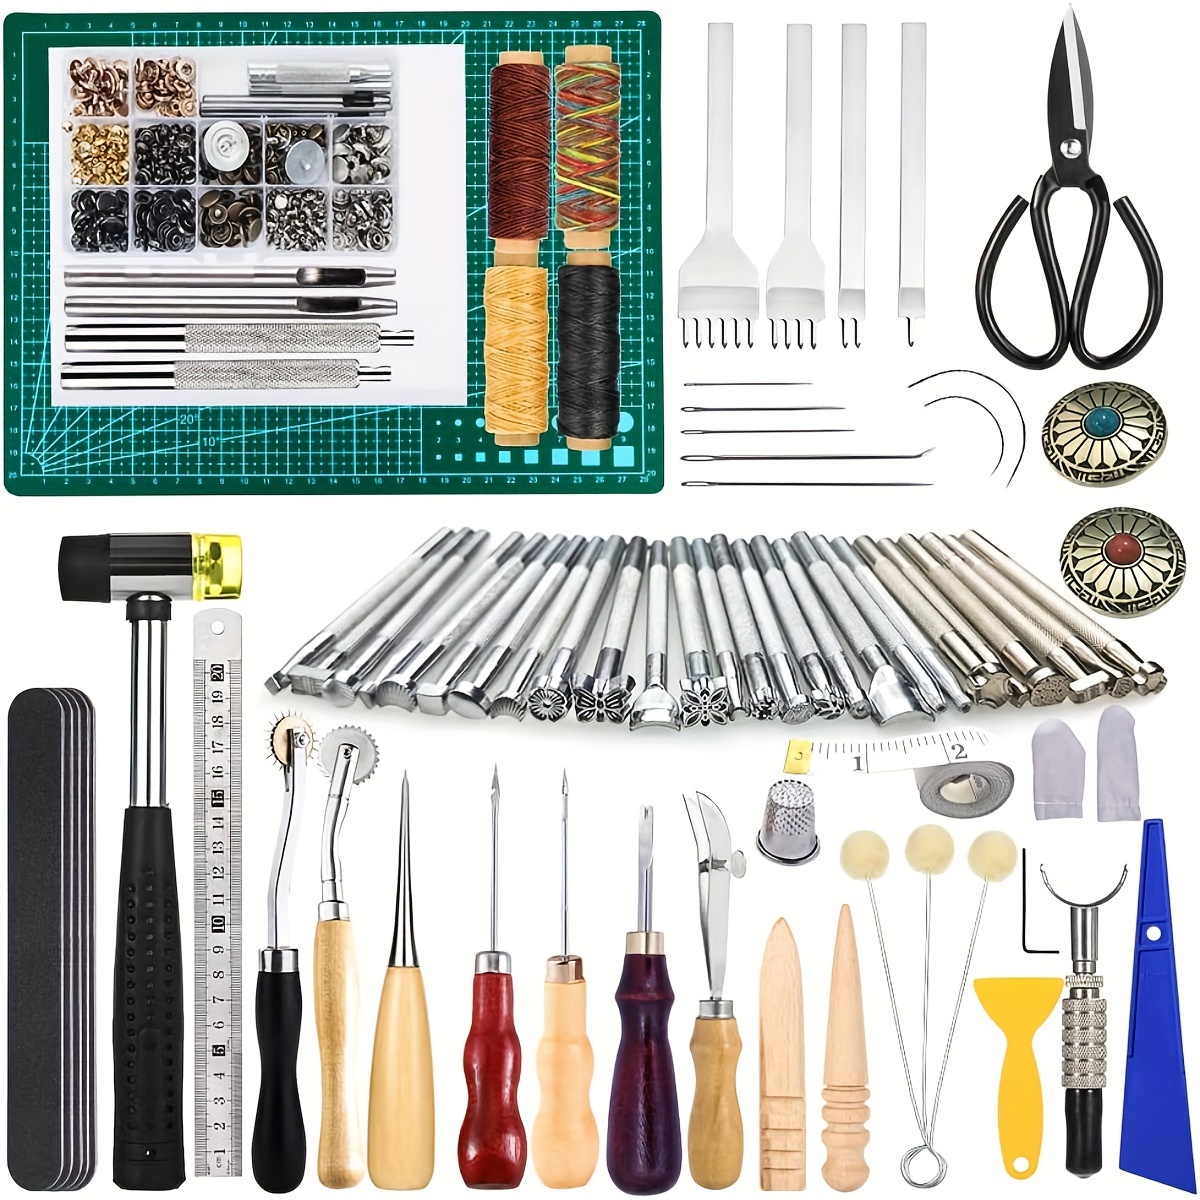 18pcs/set Leatherworking Set DIY Metal Leather Sewing Kit Portable Leather Crafting Tool Set, Size: 15 cm, Show As Pictures